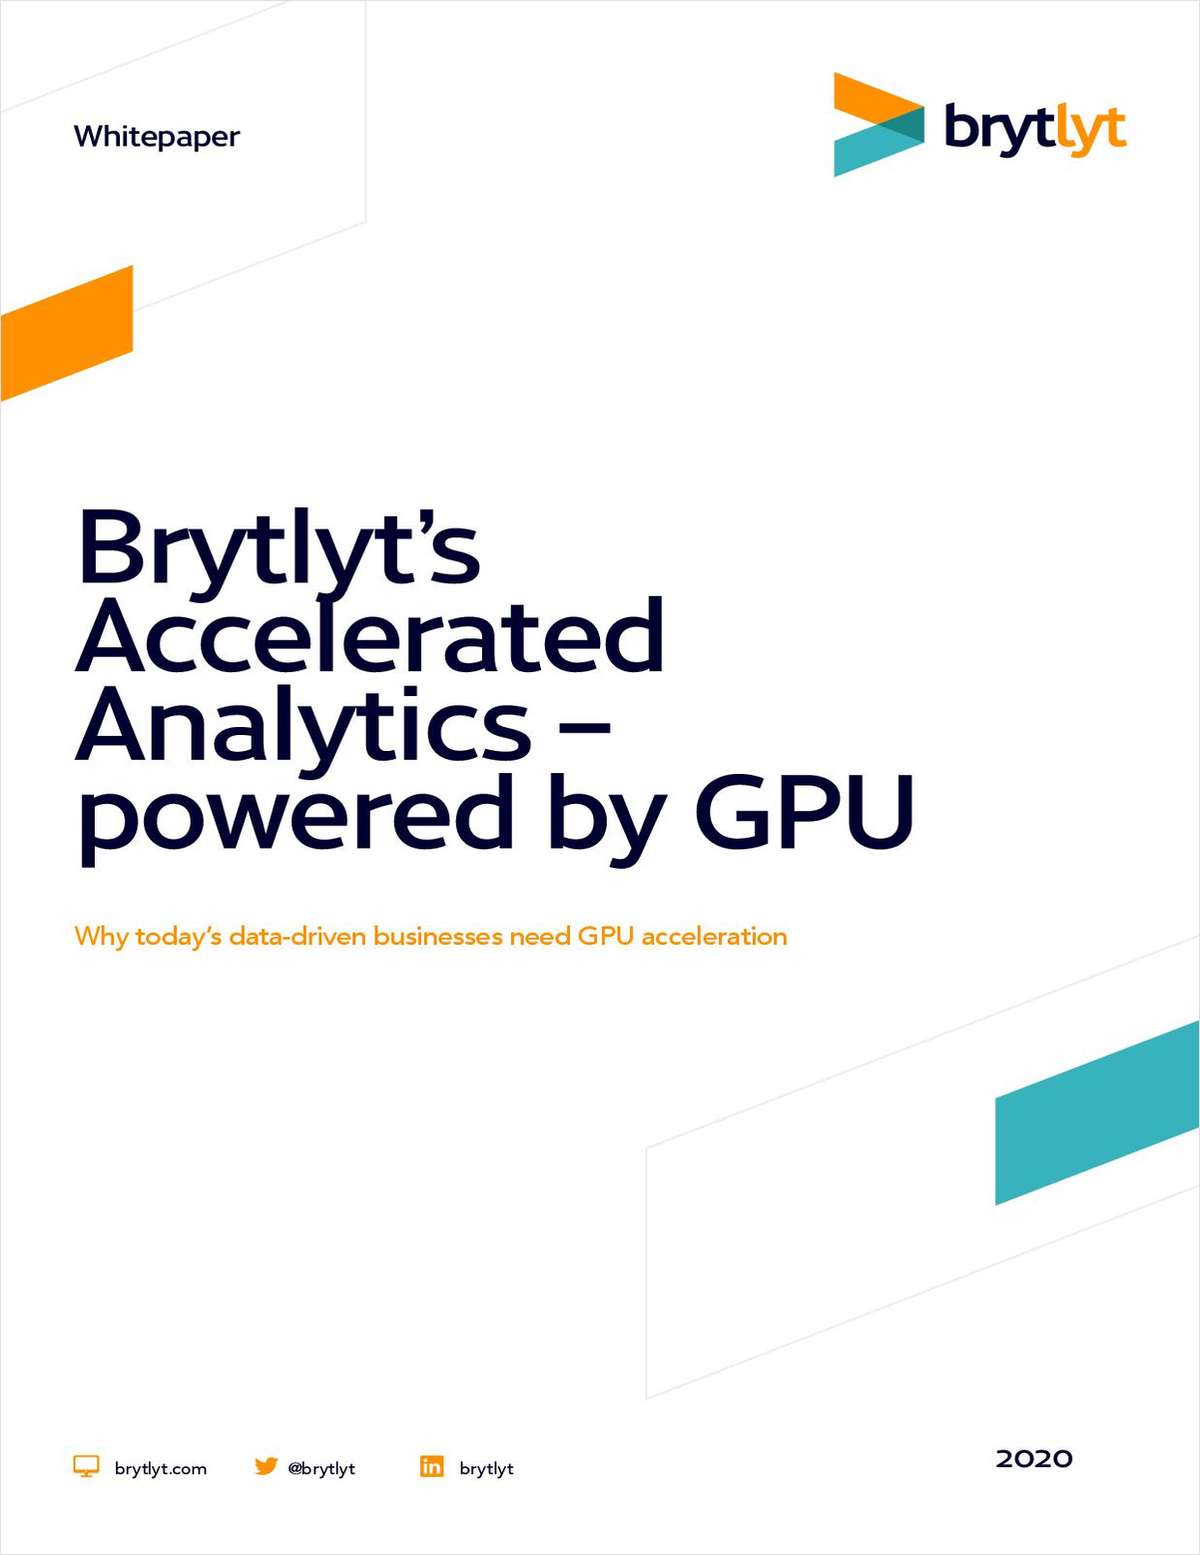 Brytlyt's Accelerated Analytics - powered by GPU